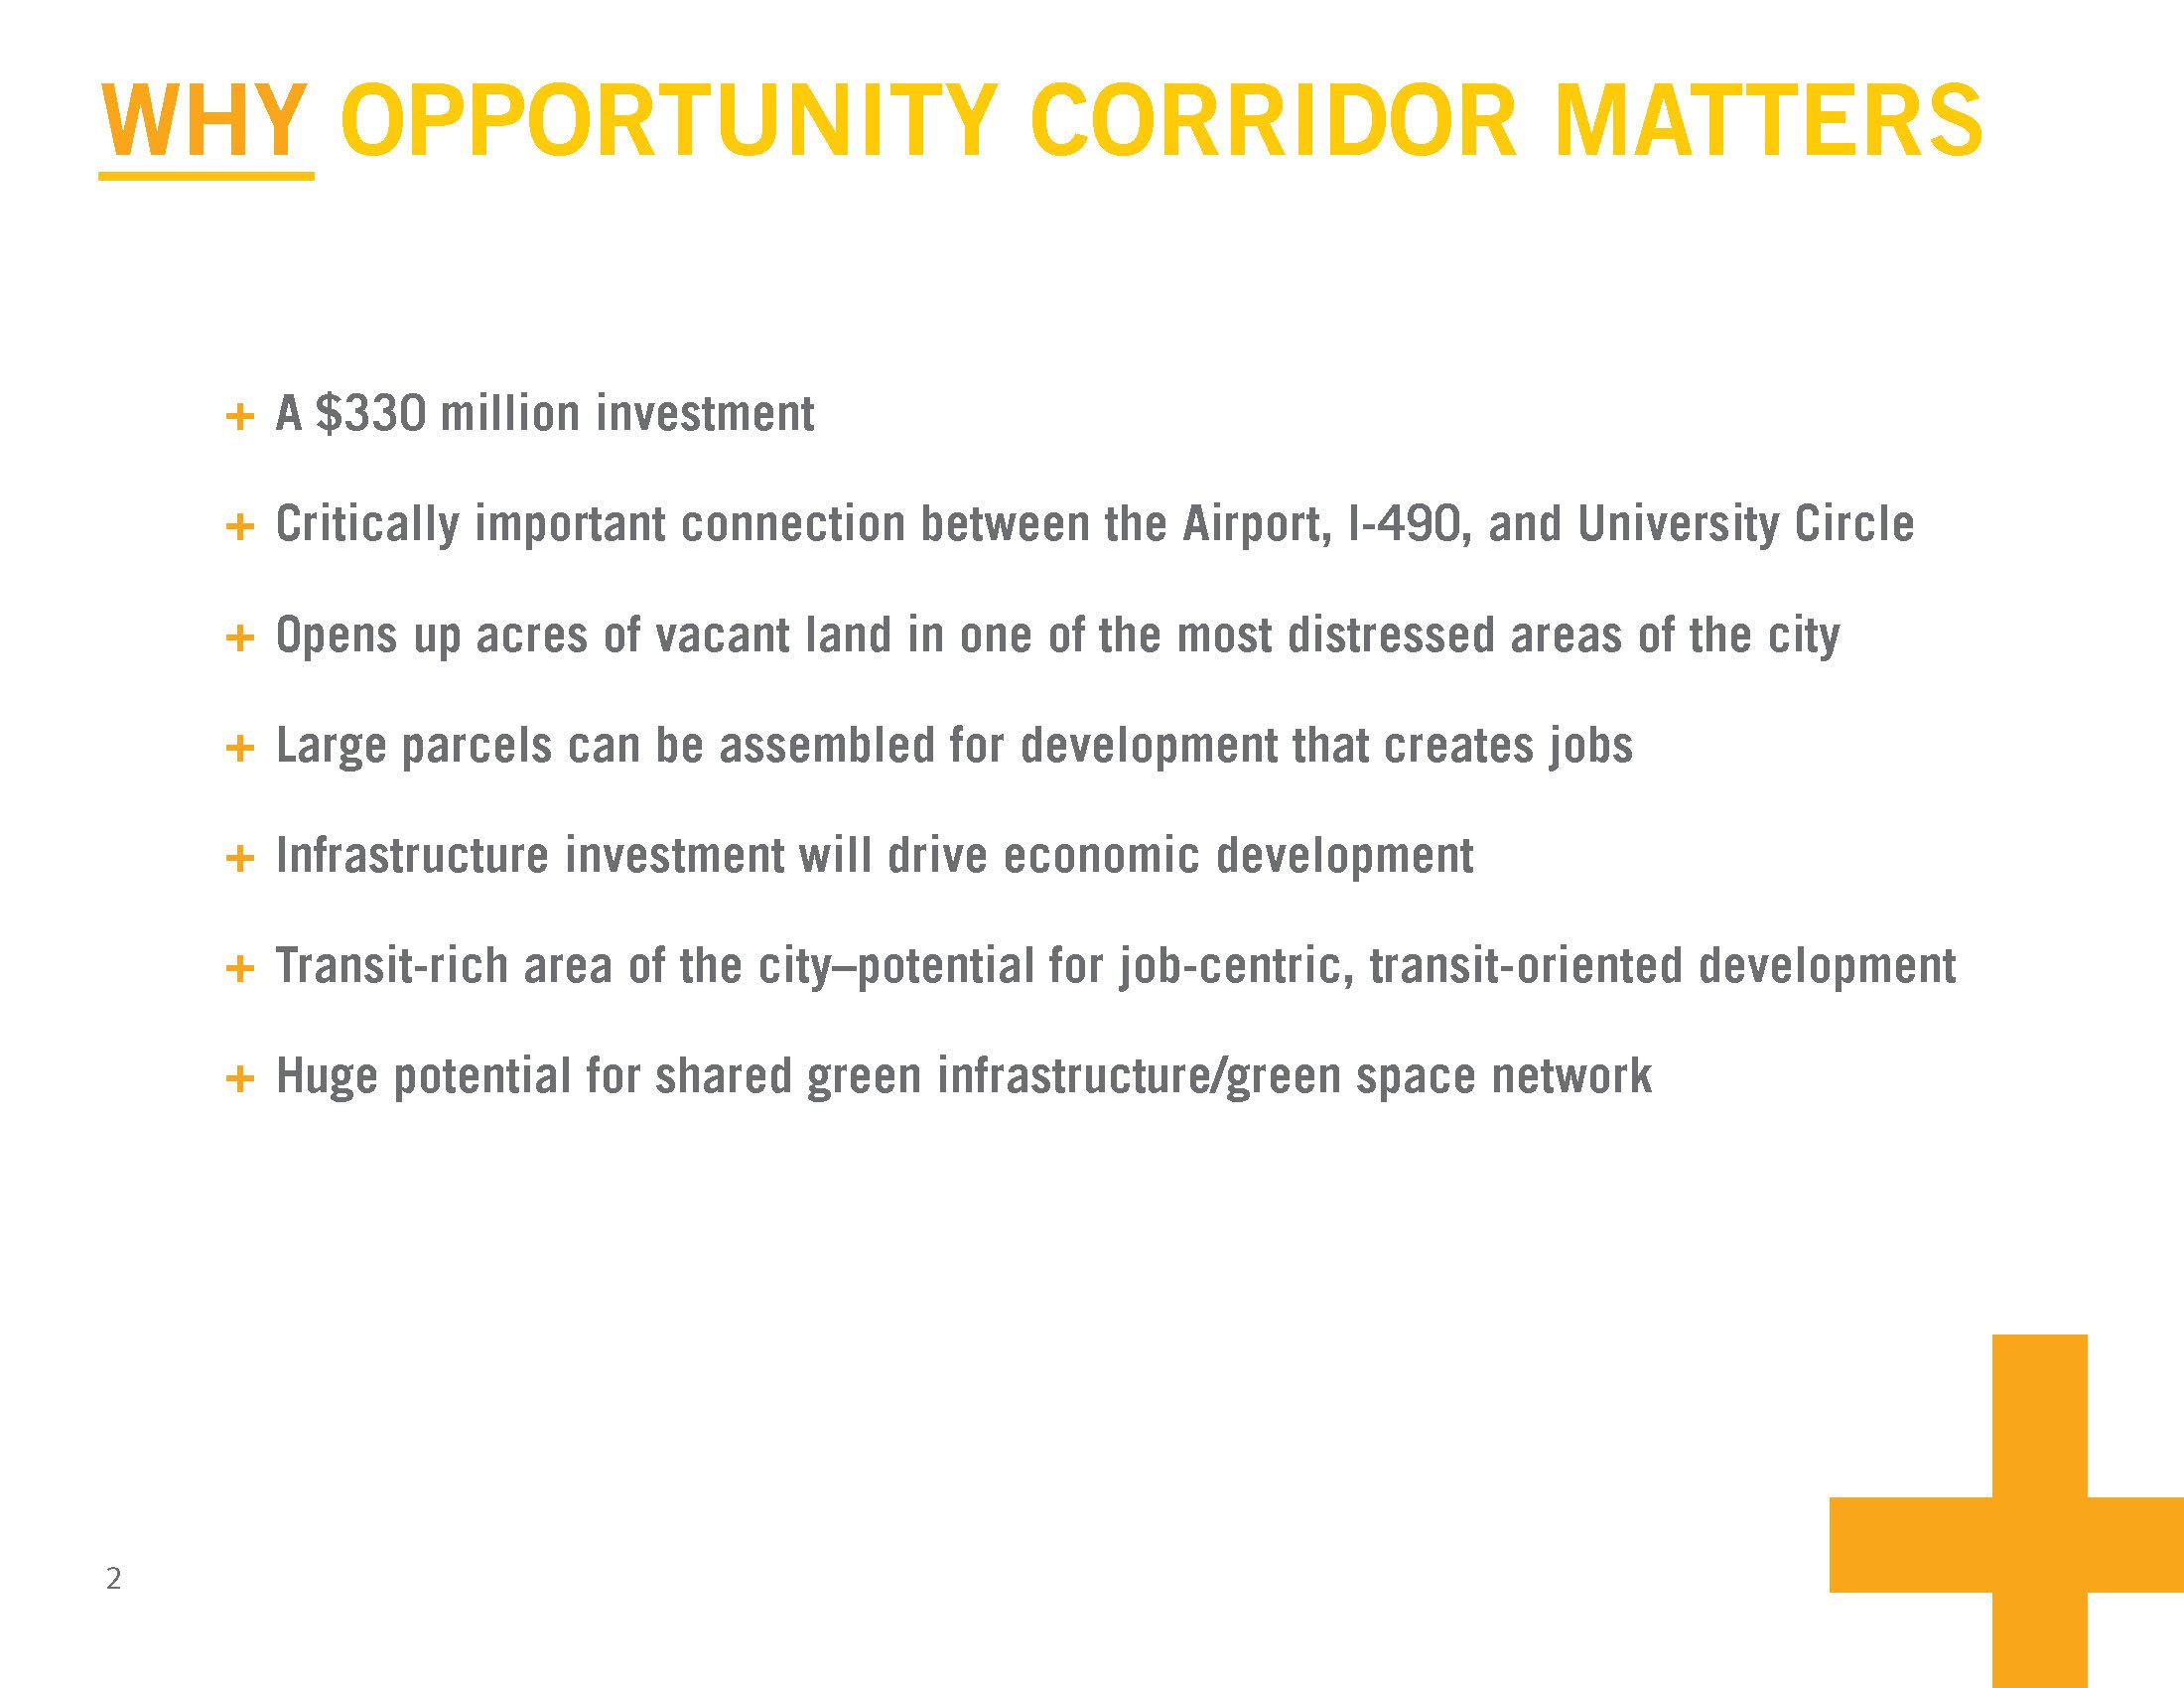 03-04-14 OPPORTUNITY CORRIDOR_Page_02.jpg